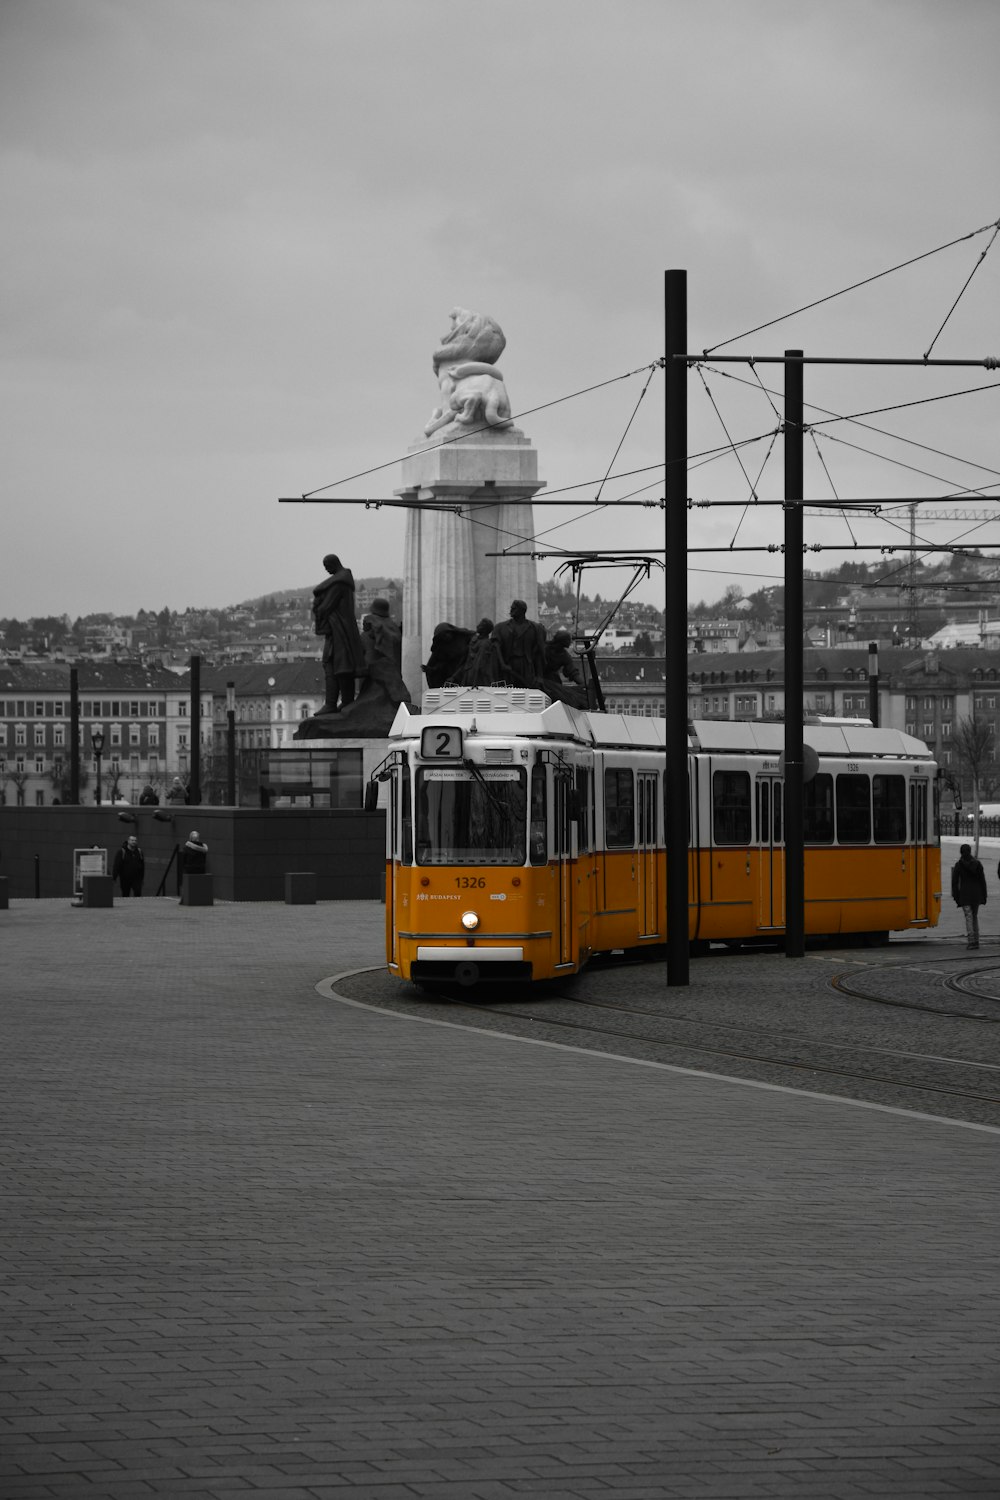 an orange and white trolley on a city street